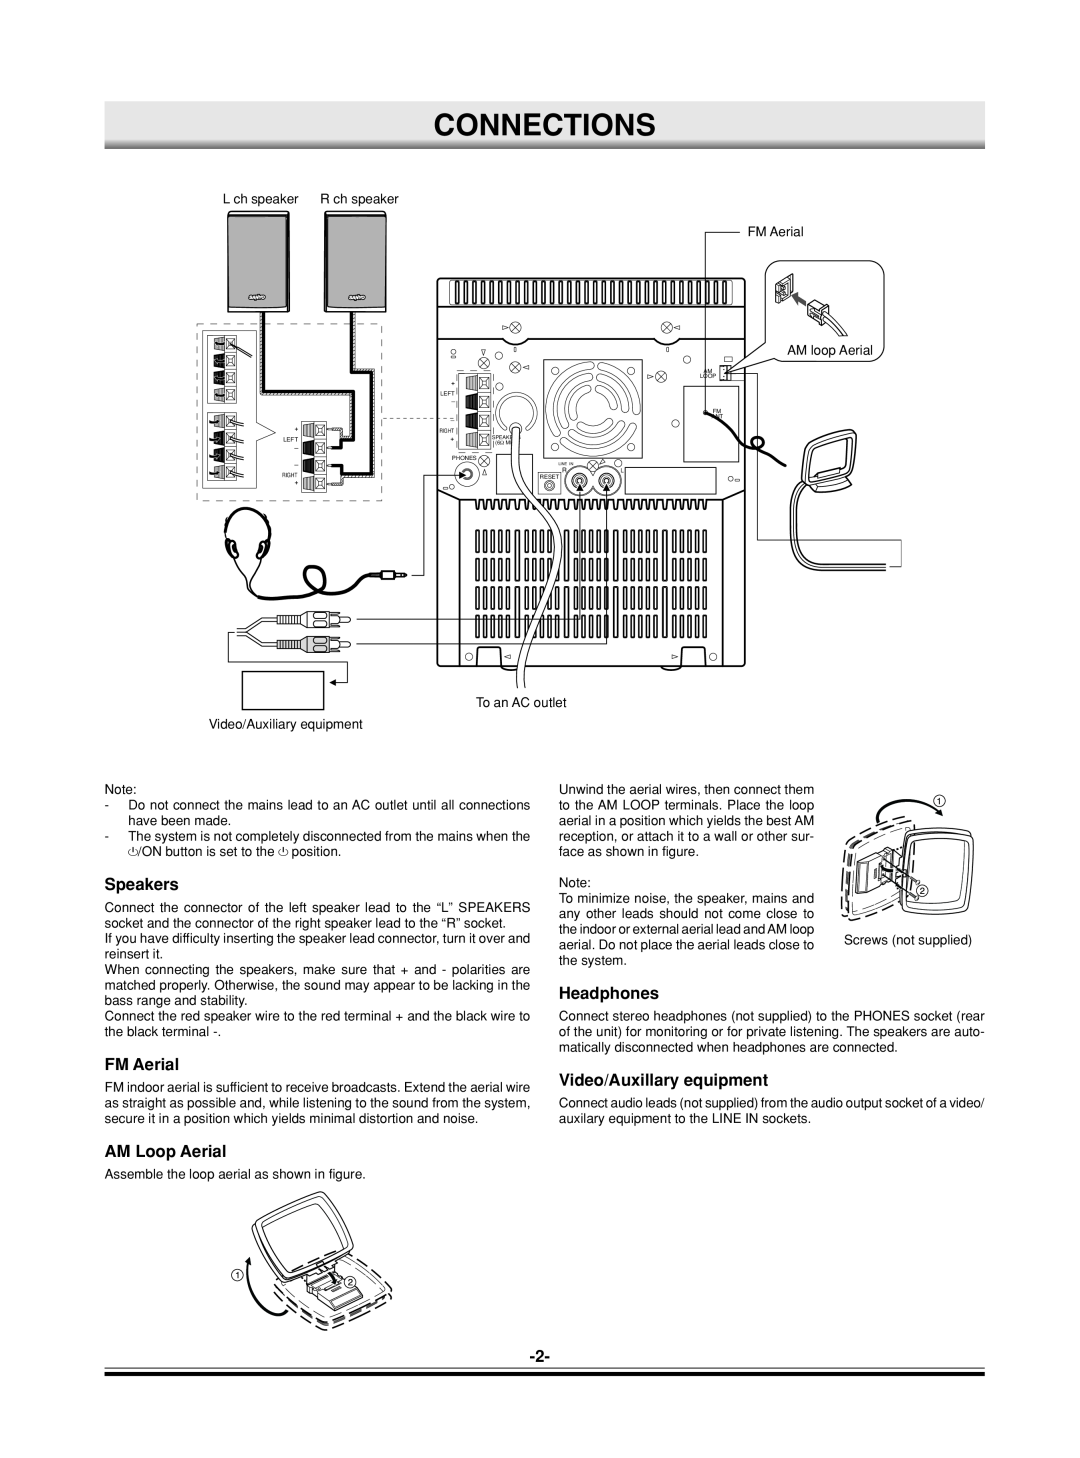 Sanyo DC-MP9500 instruction manual Connections, Speakers, Headphones, FM Aerial, Video/Auxillary equipment, AM Loop Aerial 